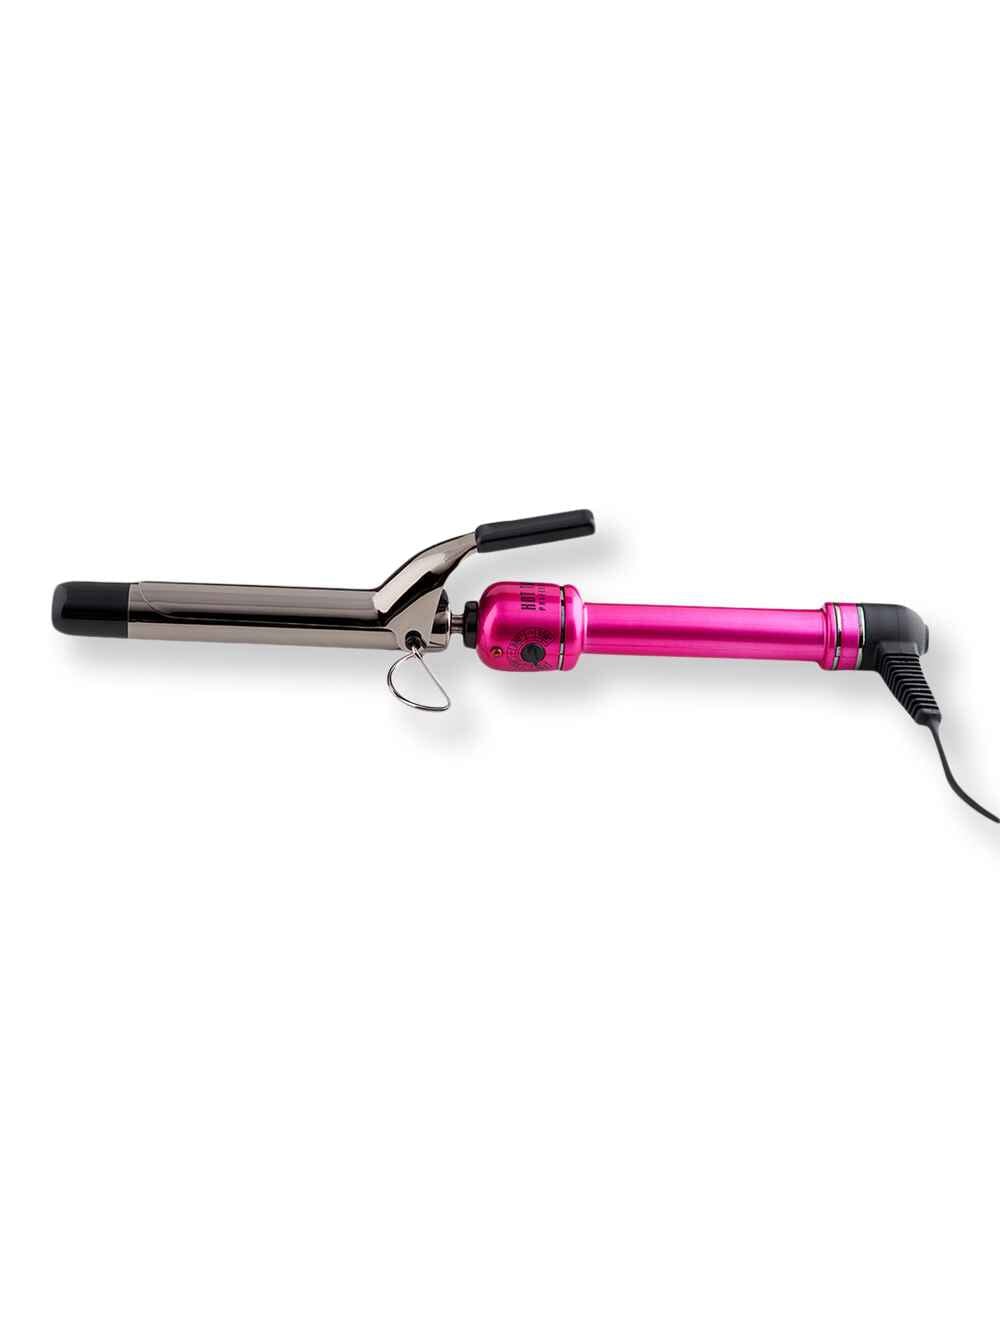 Hot Tools Hot Tools 1" Salon Curling Iron/Wand Hair Dryers & Styling Tools 